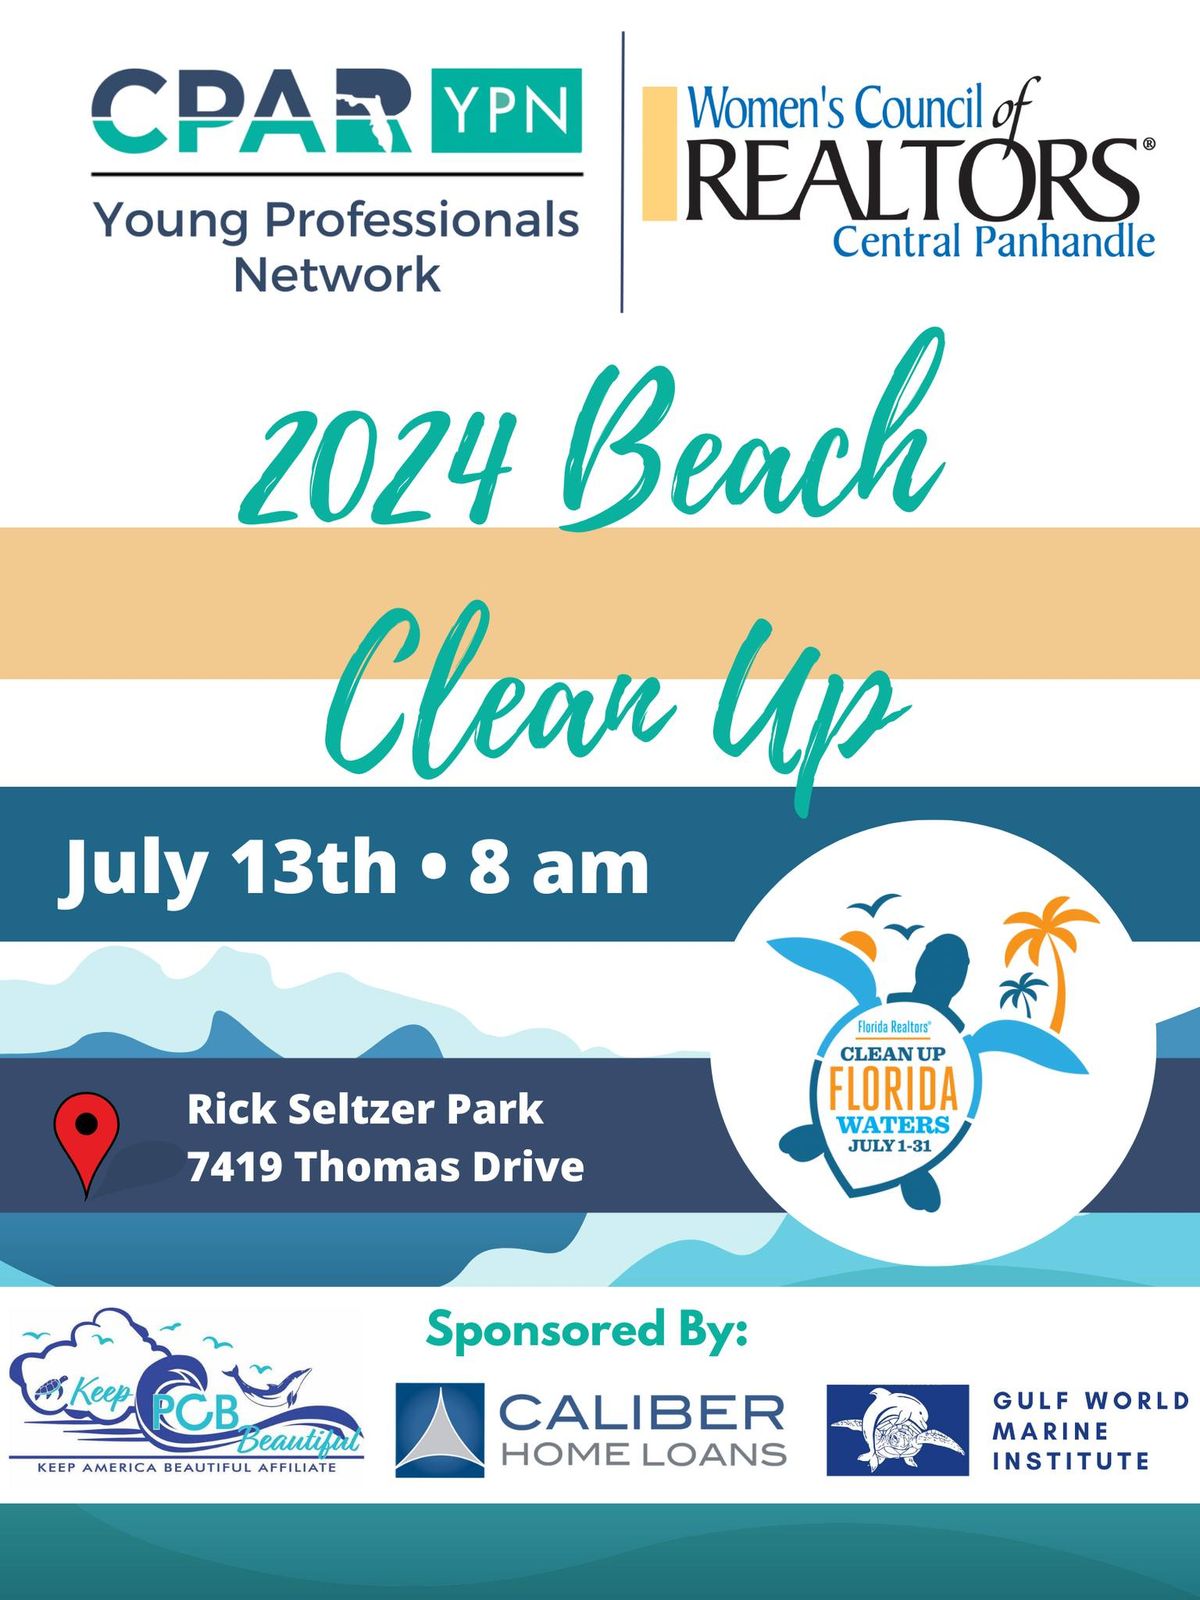 Annual Beach Clean Up with CPAR YPN and WCR Central Panhandle